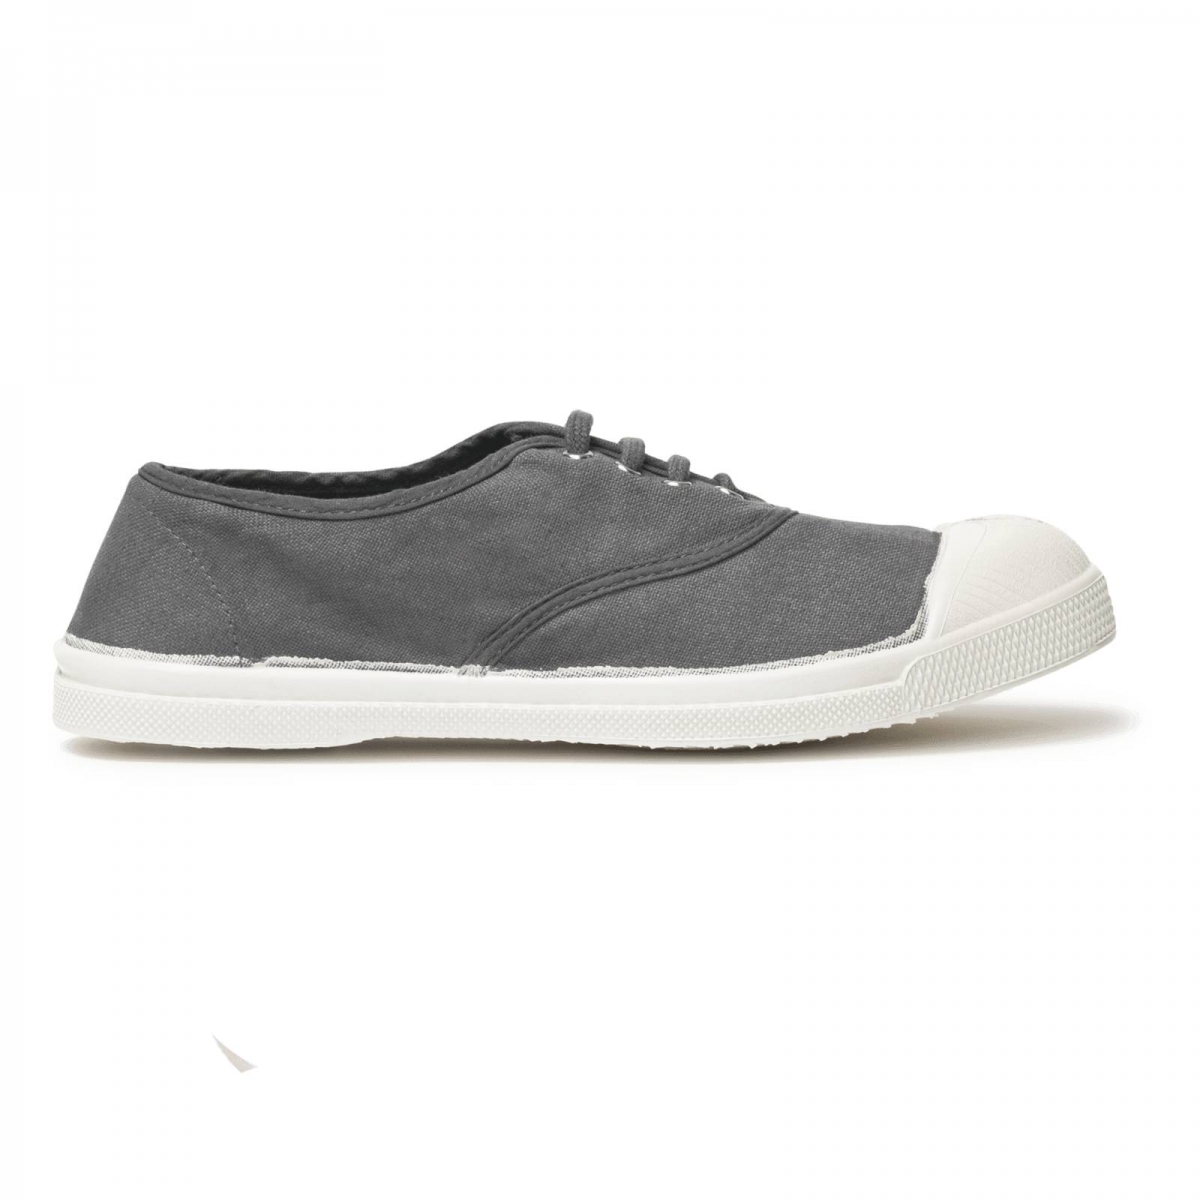 Bensimon Lace tennis sneakers adult gris F15004 - 0802